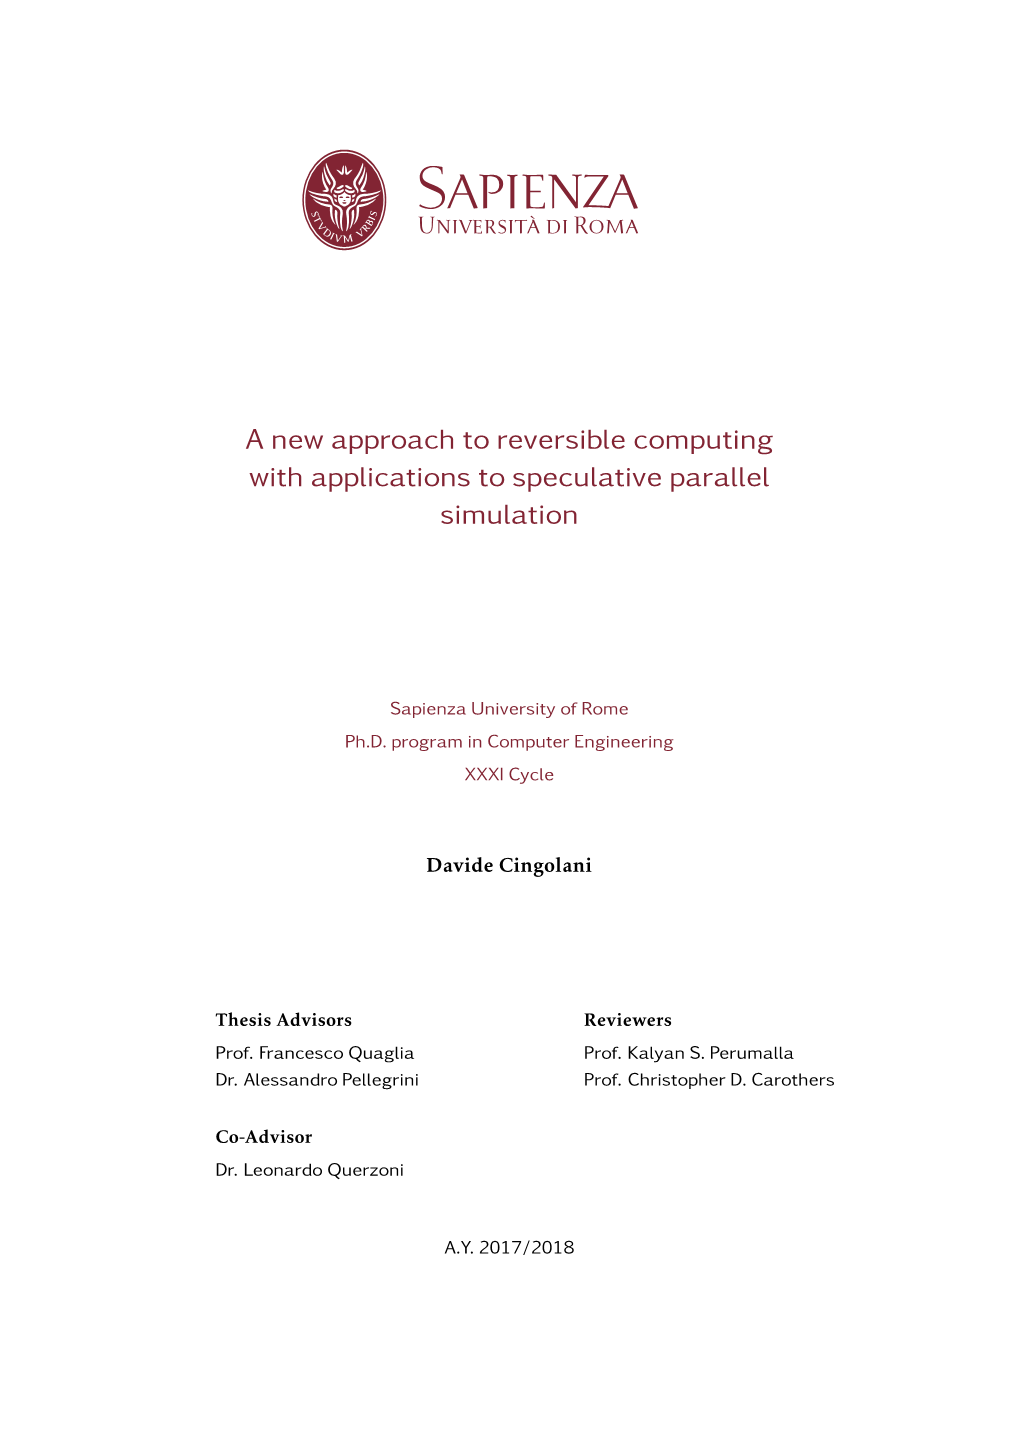 A New Approach to Reversible Computing with Applications to Speculative Parallel Simulation